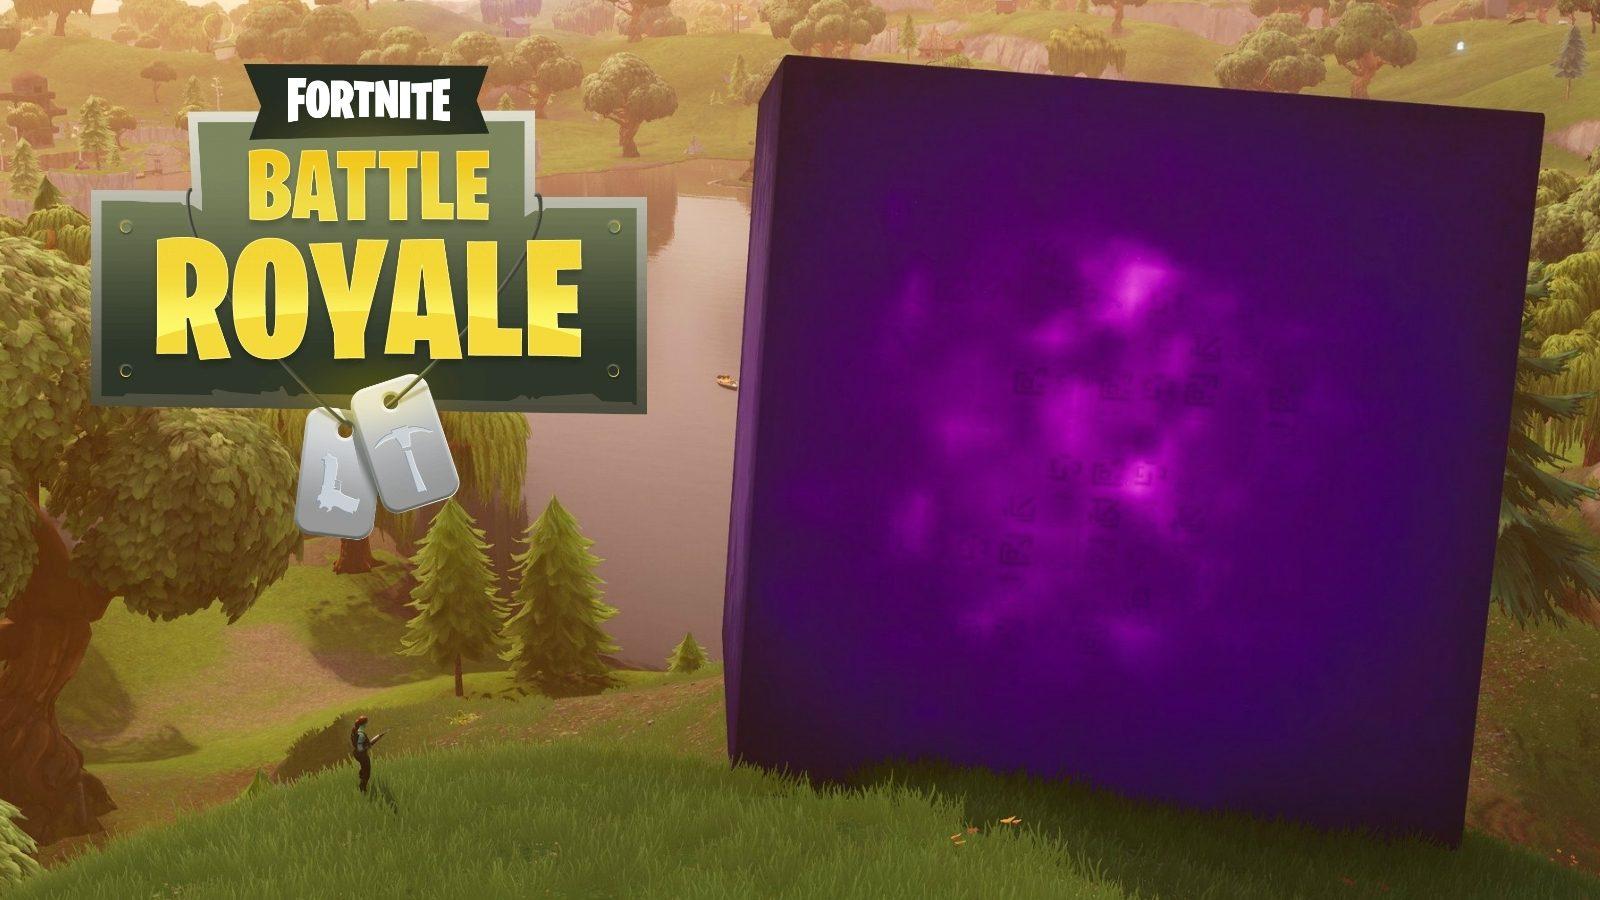 Fortnite Players Have Spotted Kevin The Cube In Game In A Strange